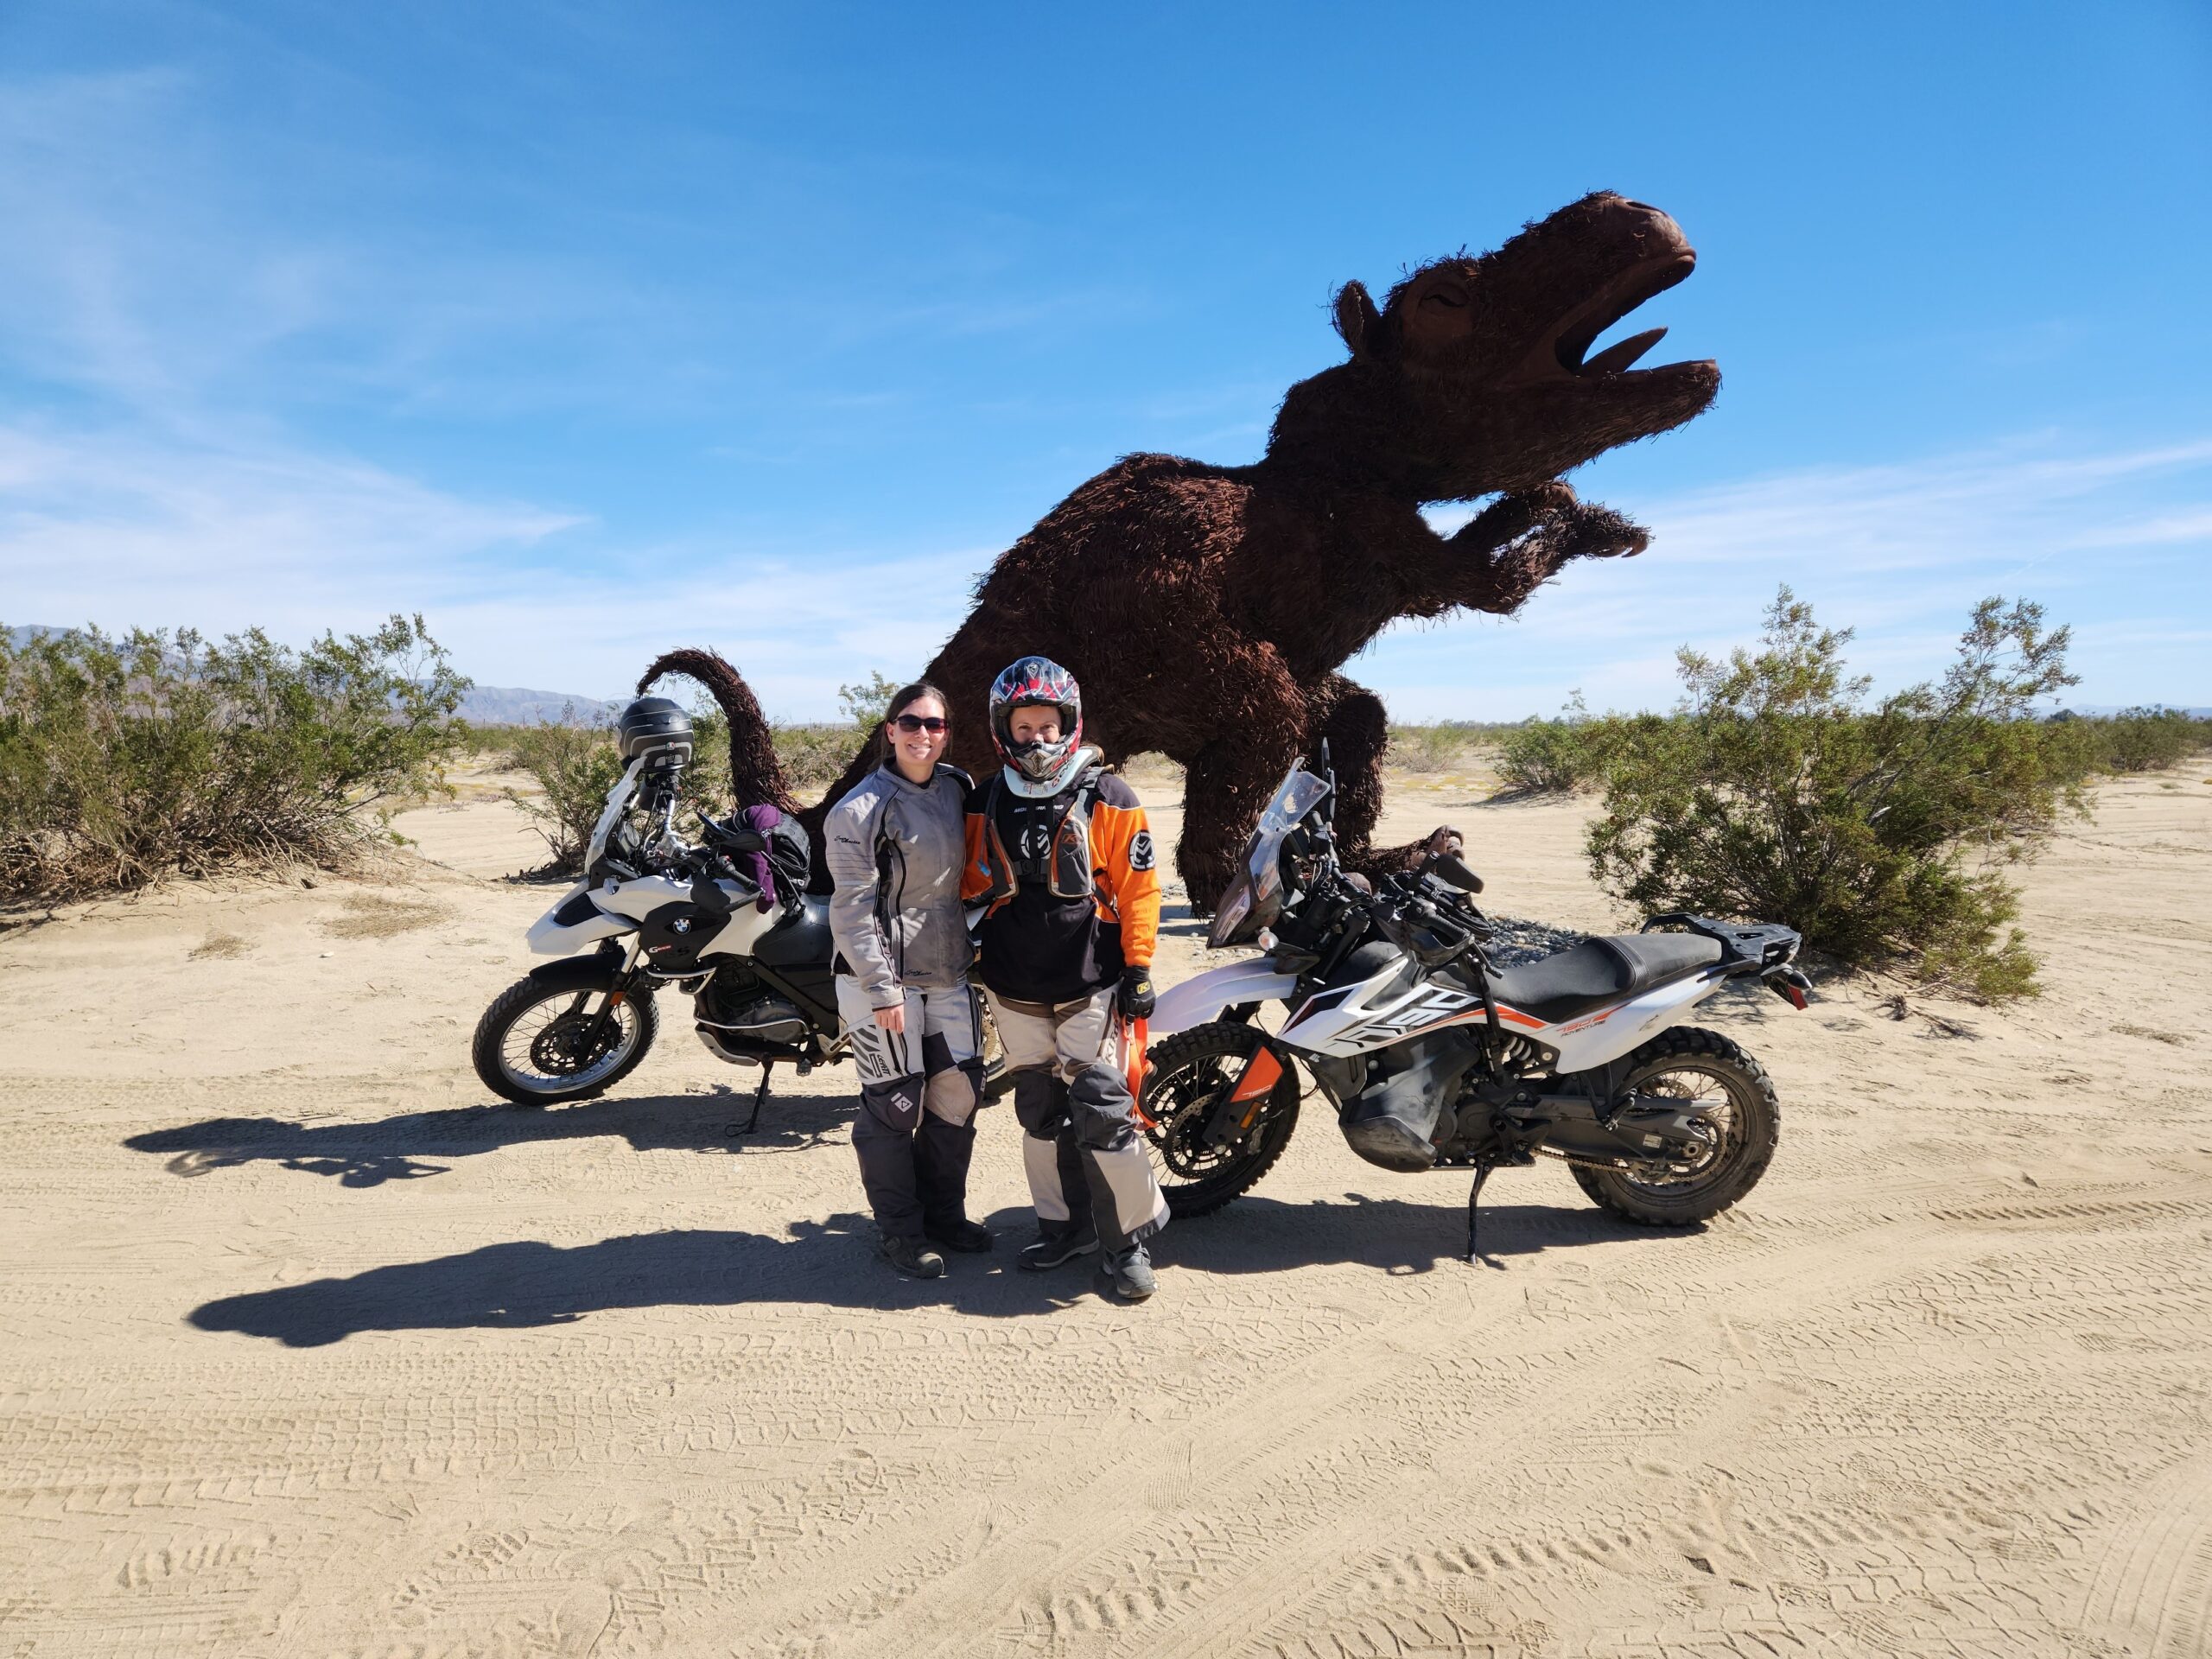 Two motorcycle riders, a KTM 790 adventure motorcycle, and a BMW G650GS adventure motorcycle, stand in front of a T-rex iron sculpture in Anza Borrego State Park, California